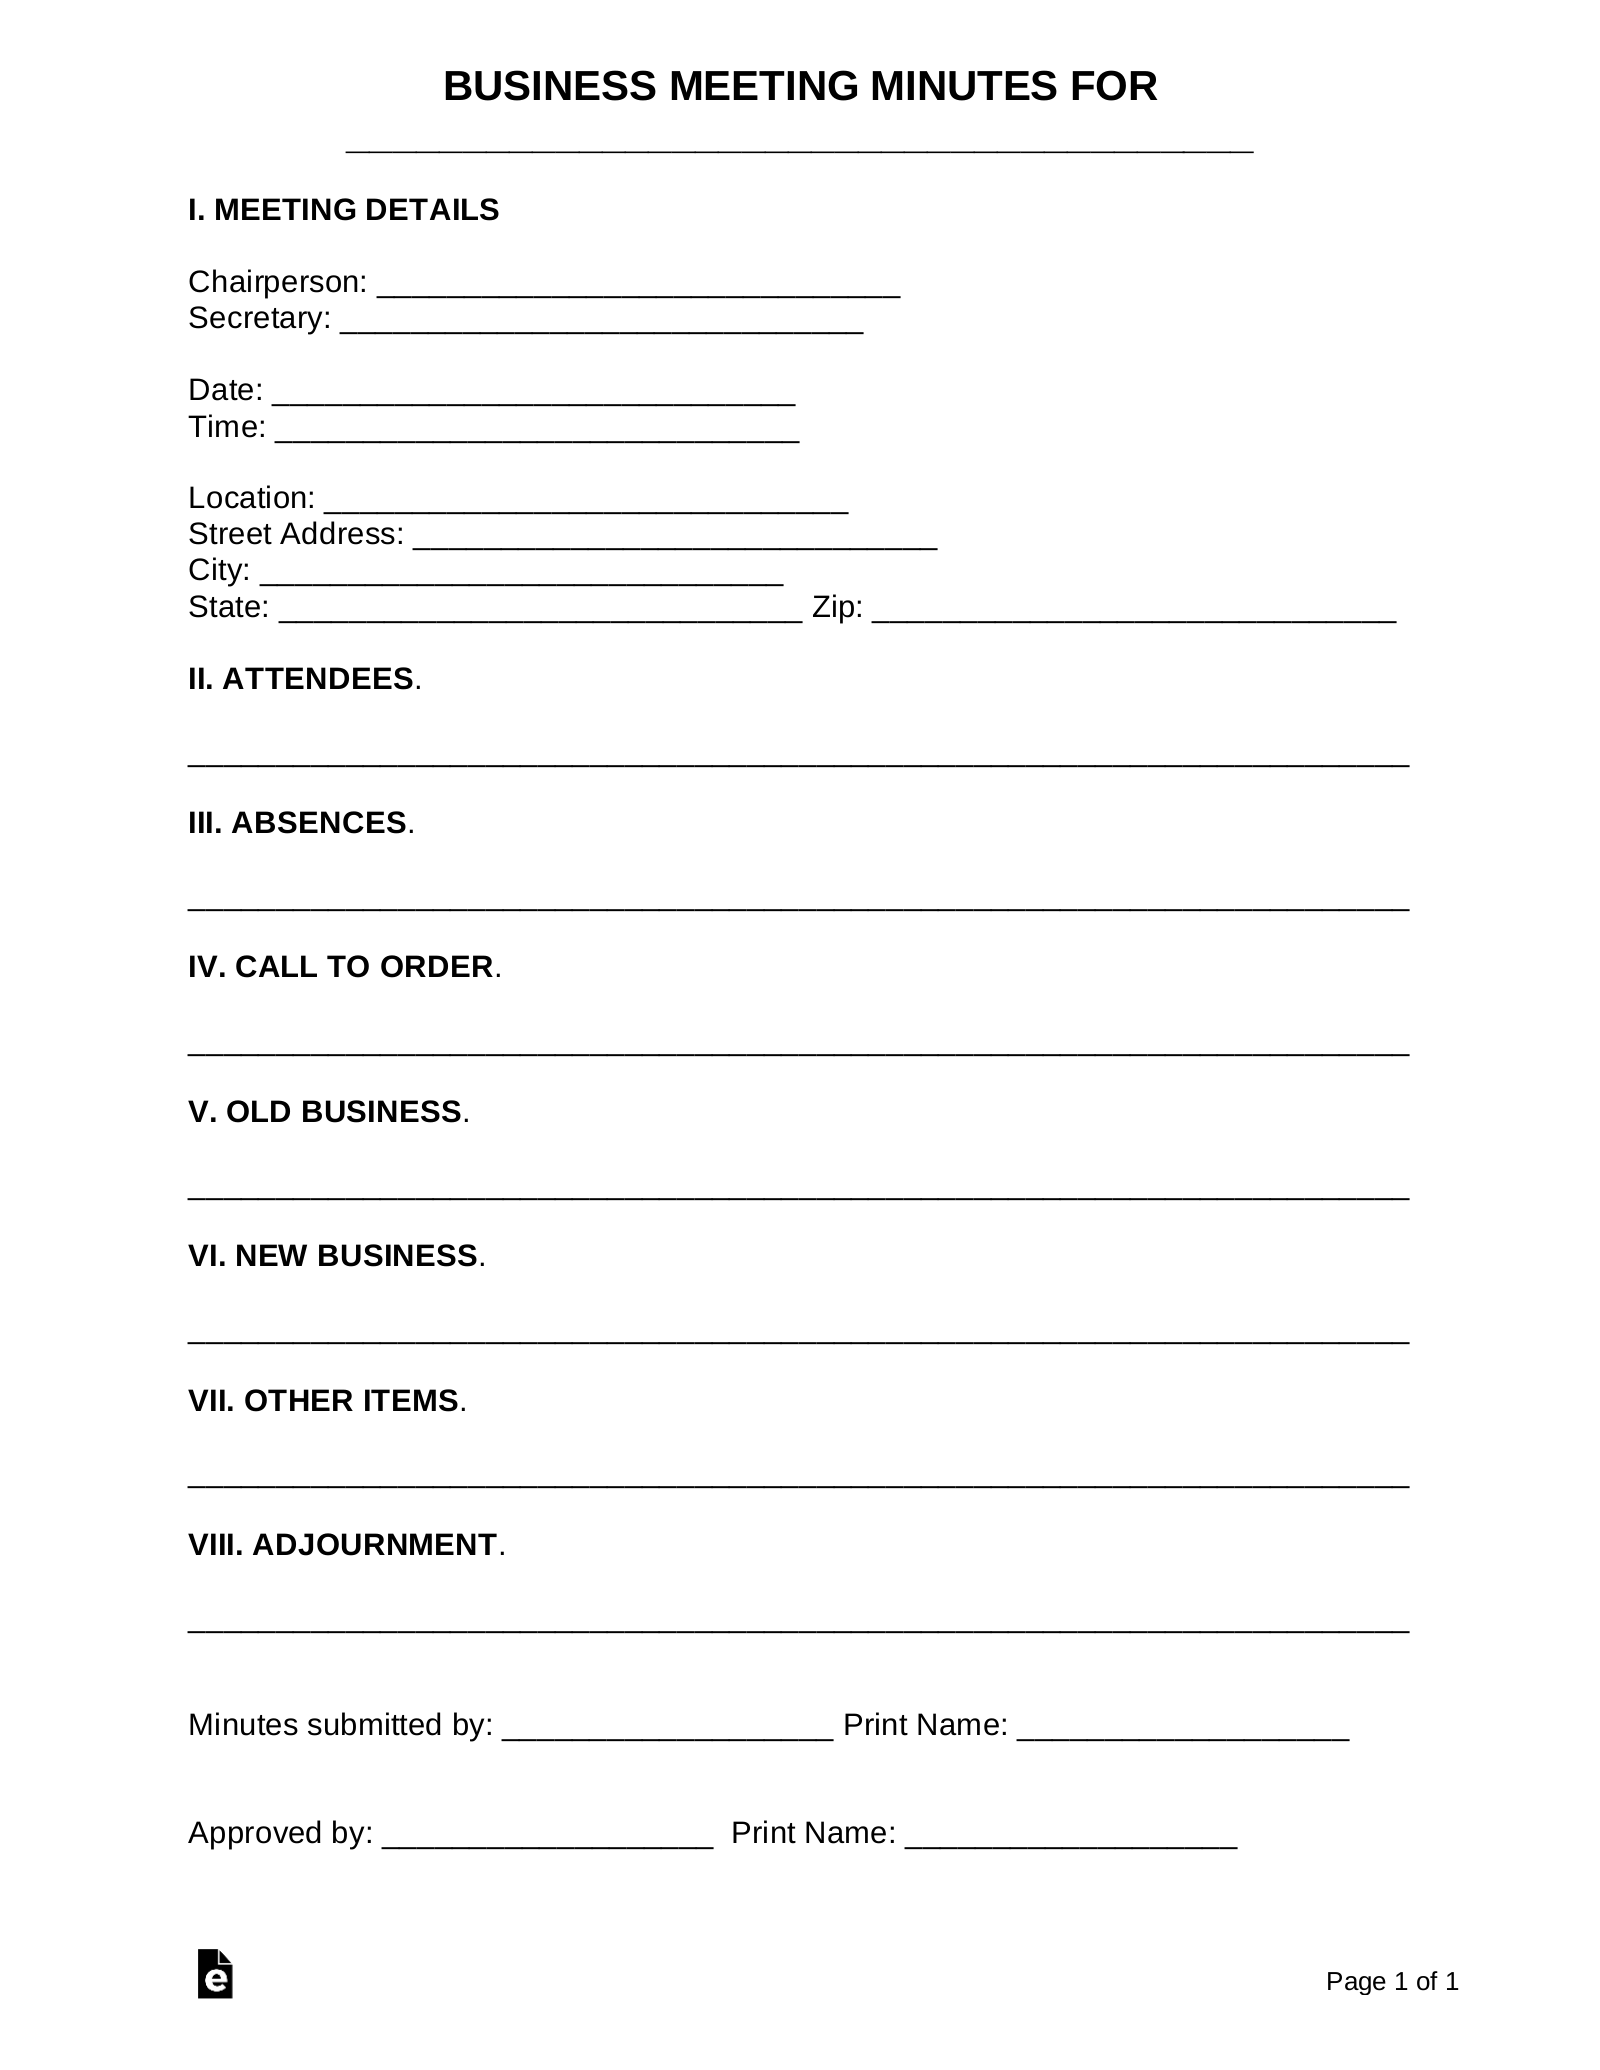 Llc Business Meeting Minutes Template